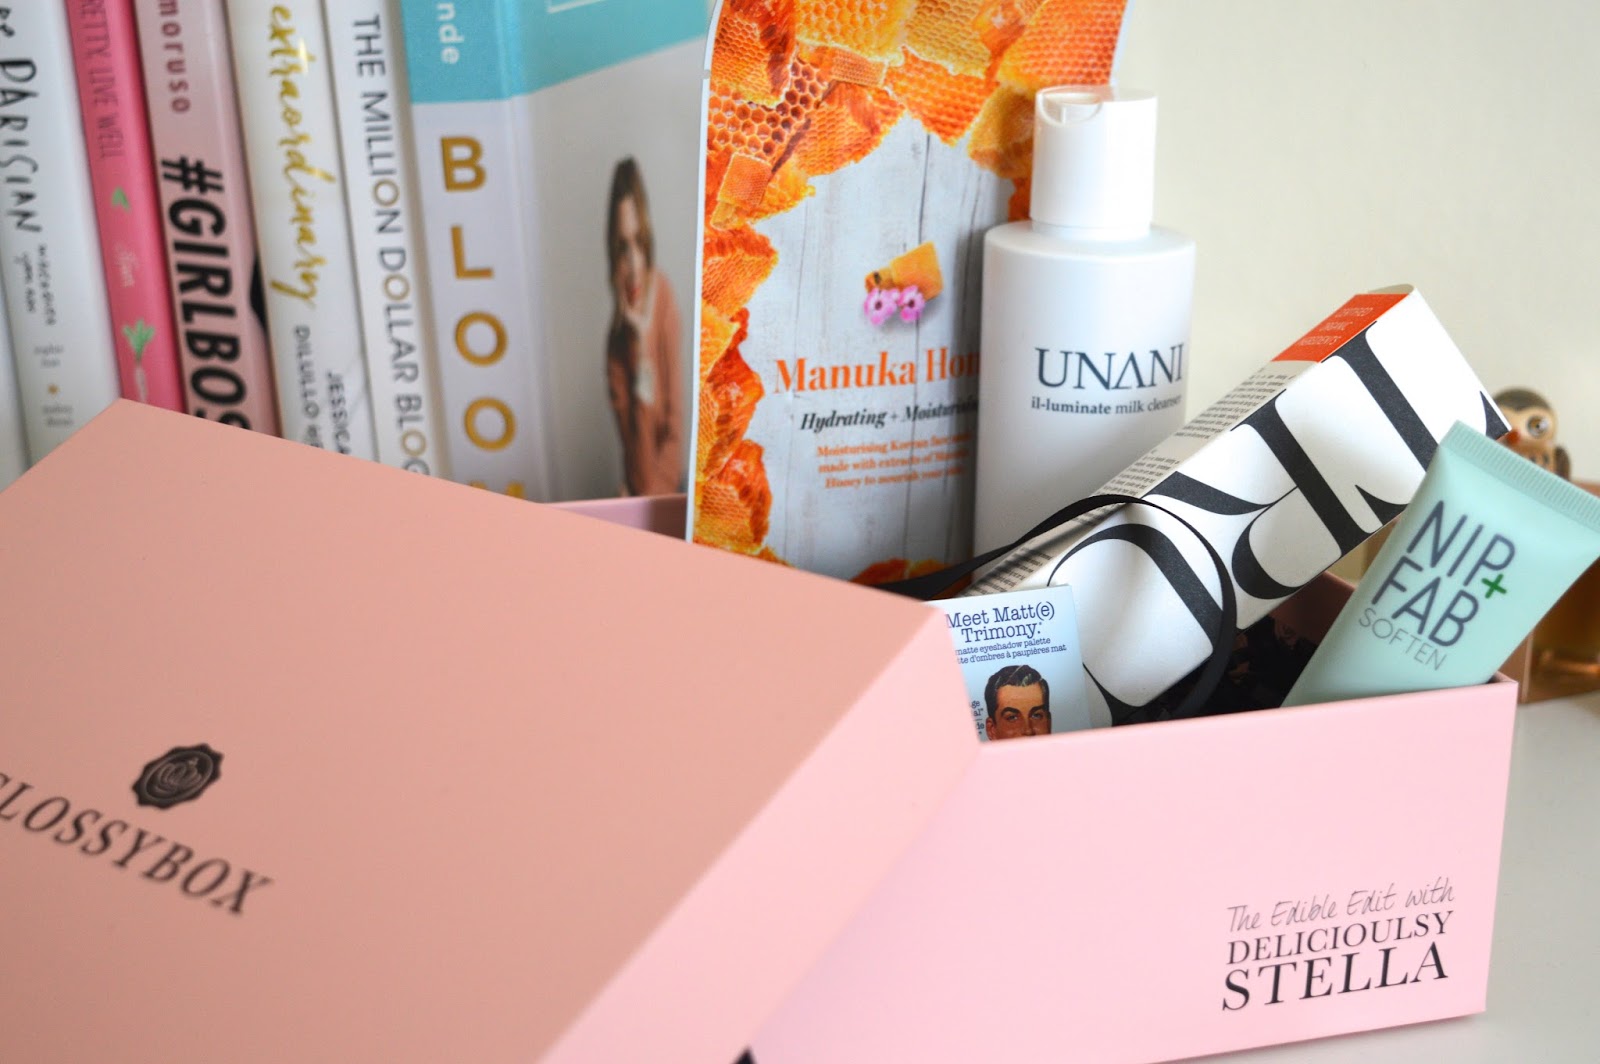 Best beauty boxes UK, Glossybox review, what are beauty boxes, UK beauty blog, Dalry Rose blog